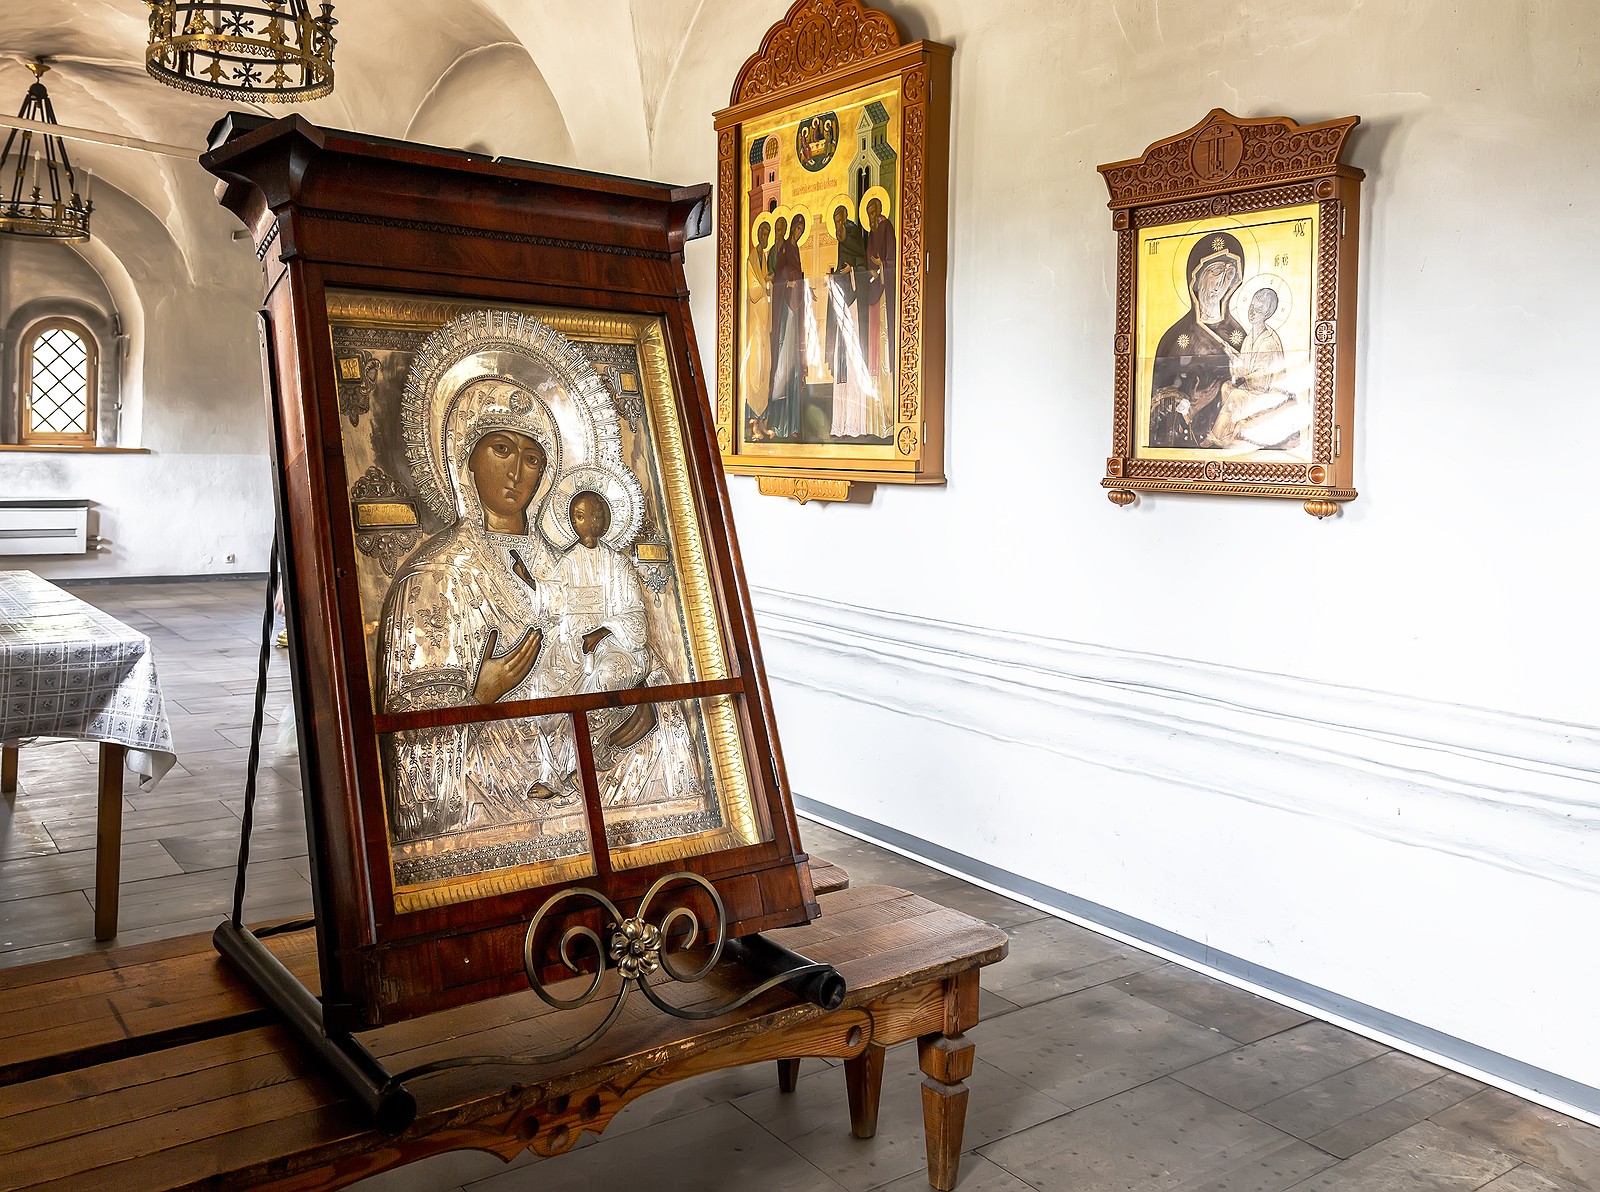 Russian Icons as Part of Orthodox Christianity